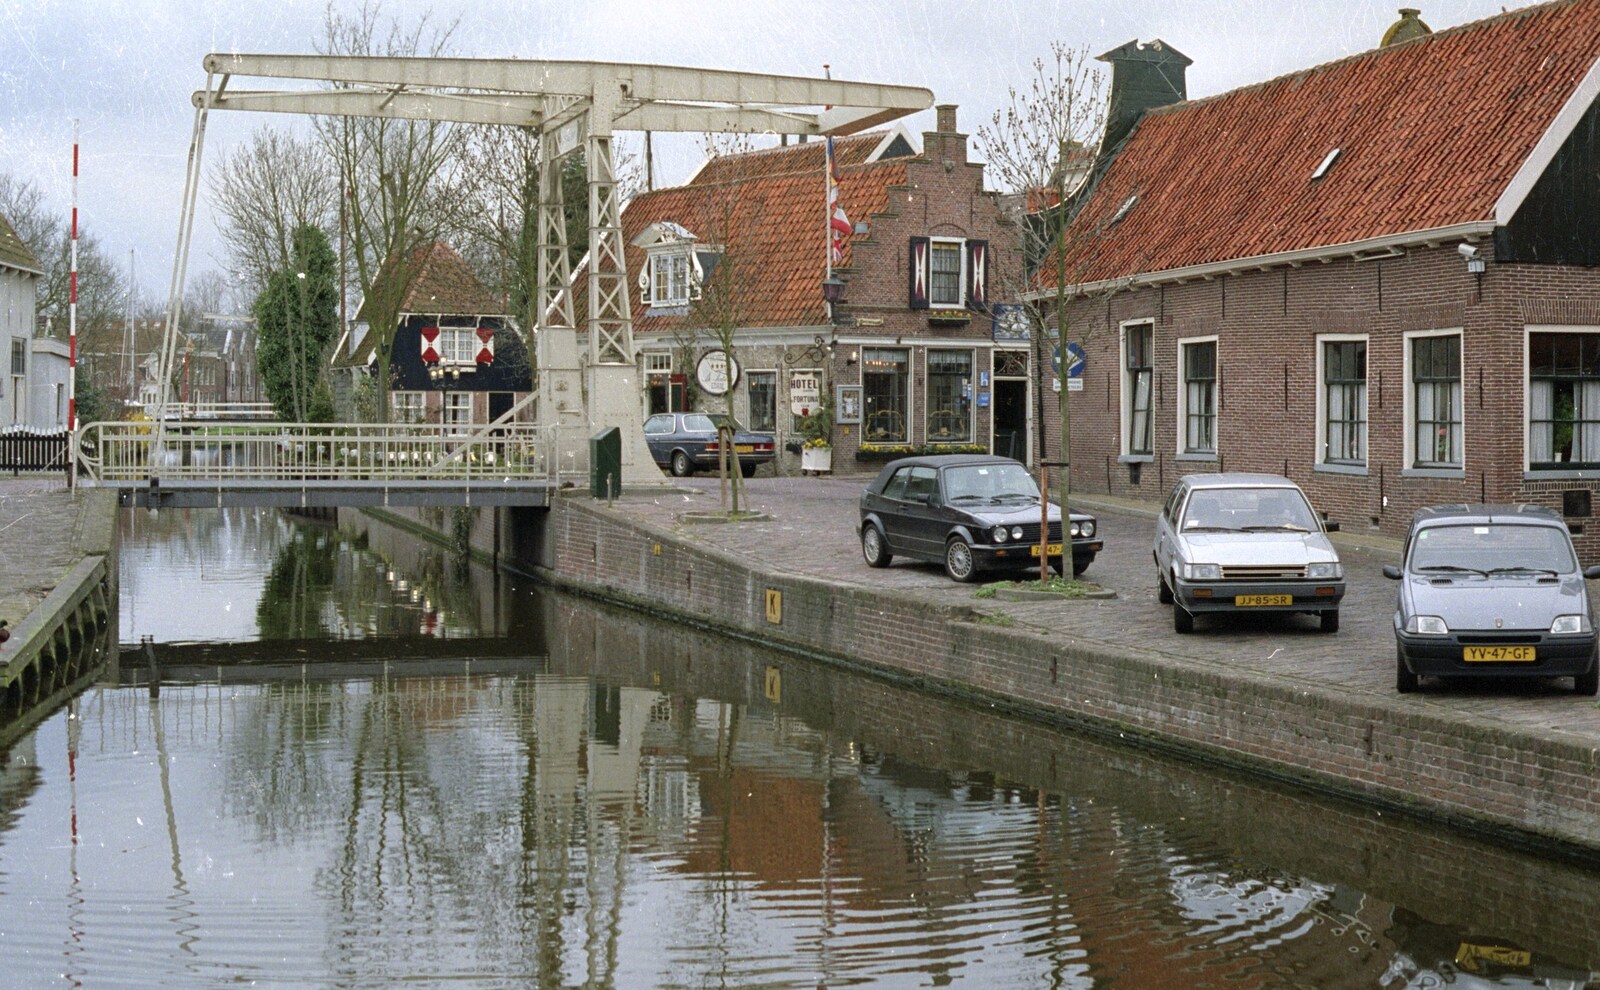 Out and About in Amsterdam, Hoorne, Vollendam and Edam, The Netherlands - 26th March 1992: A bridge over a Dutch river